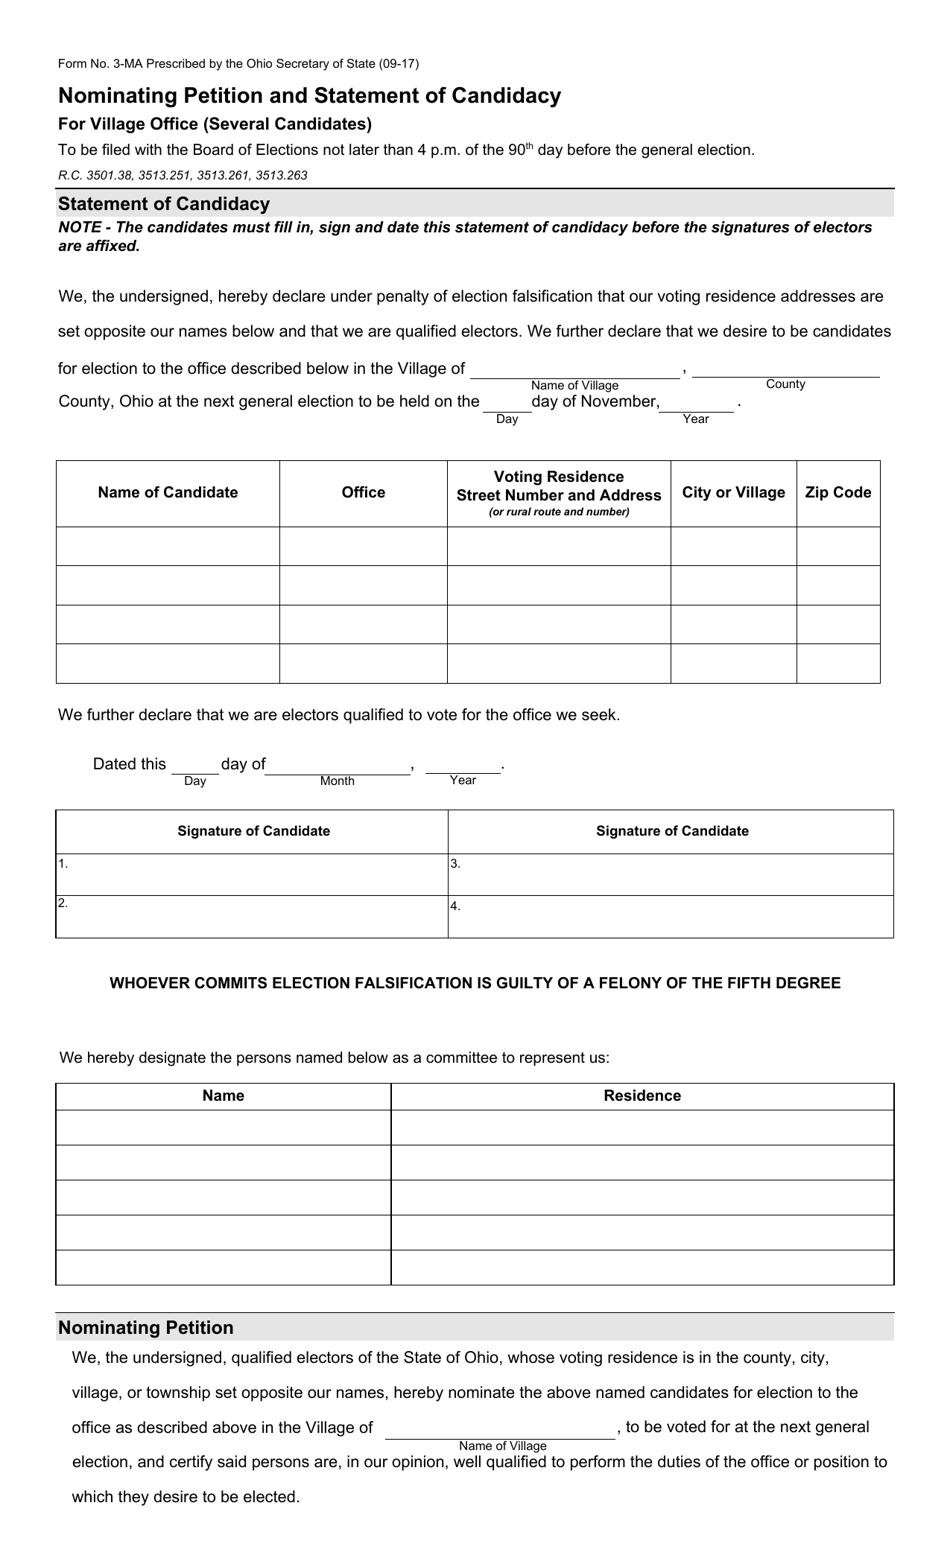 Form 3-MA Nominating Petition and Statement of Candidacy for Village Office (Several Candidates) - Ohio, Page 1